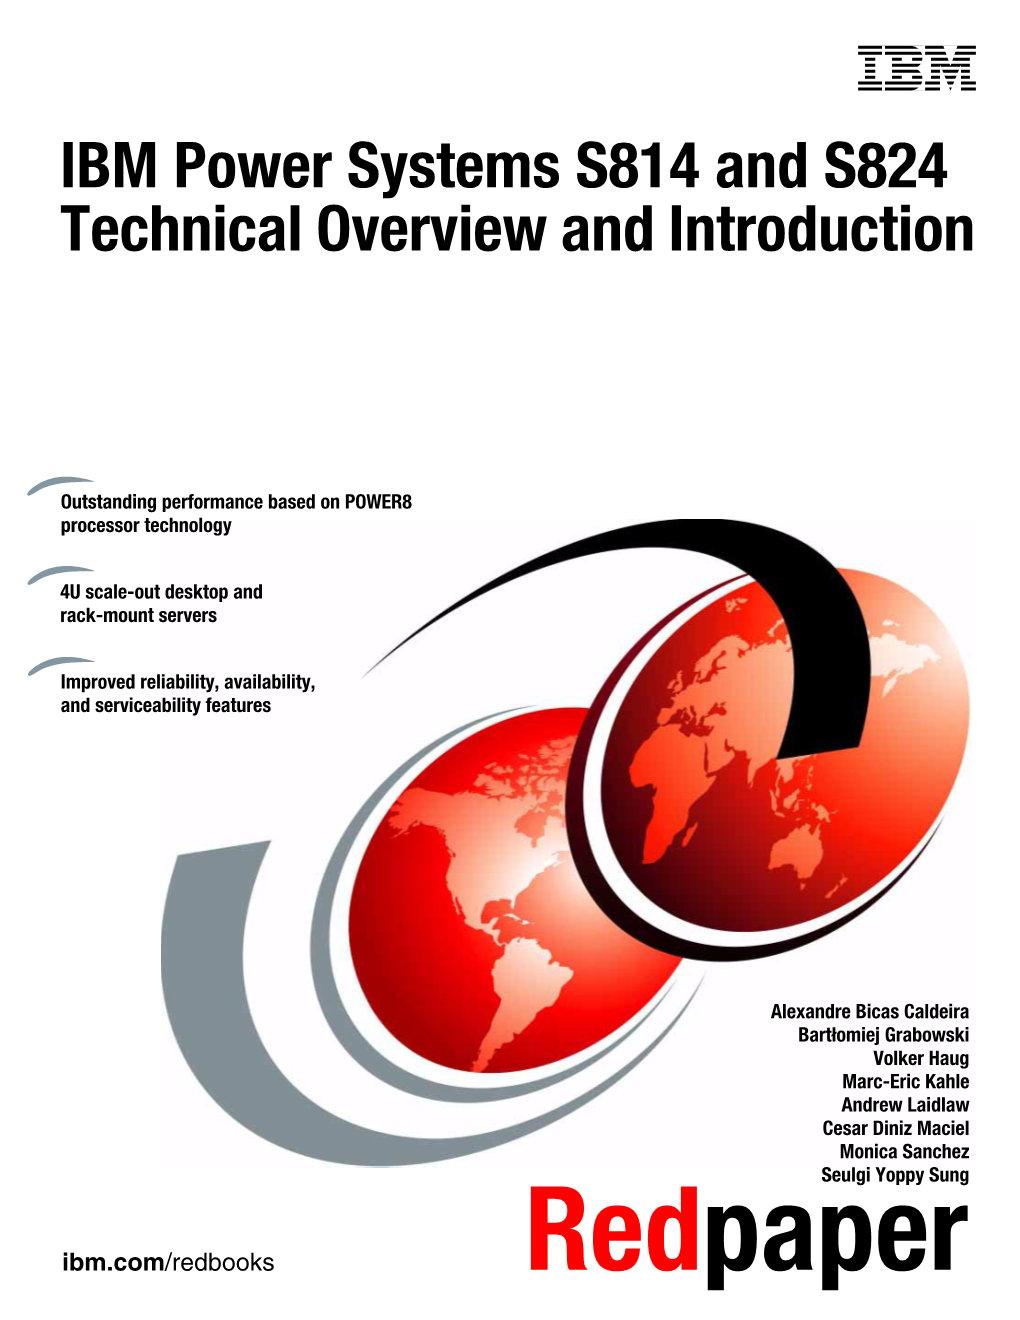 IBM Power System S814 and S824 Technical Overview and Introduction